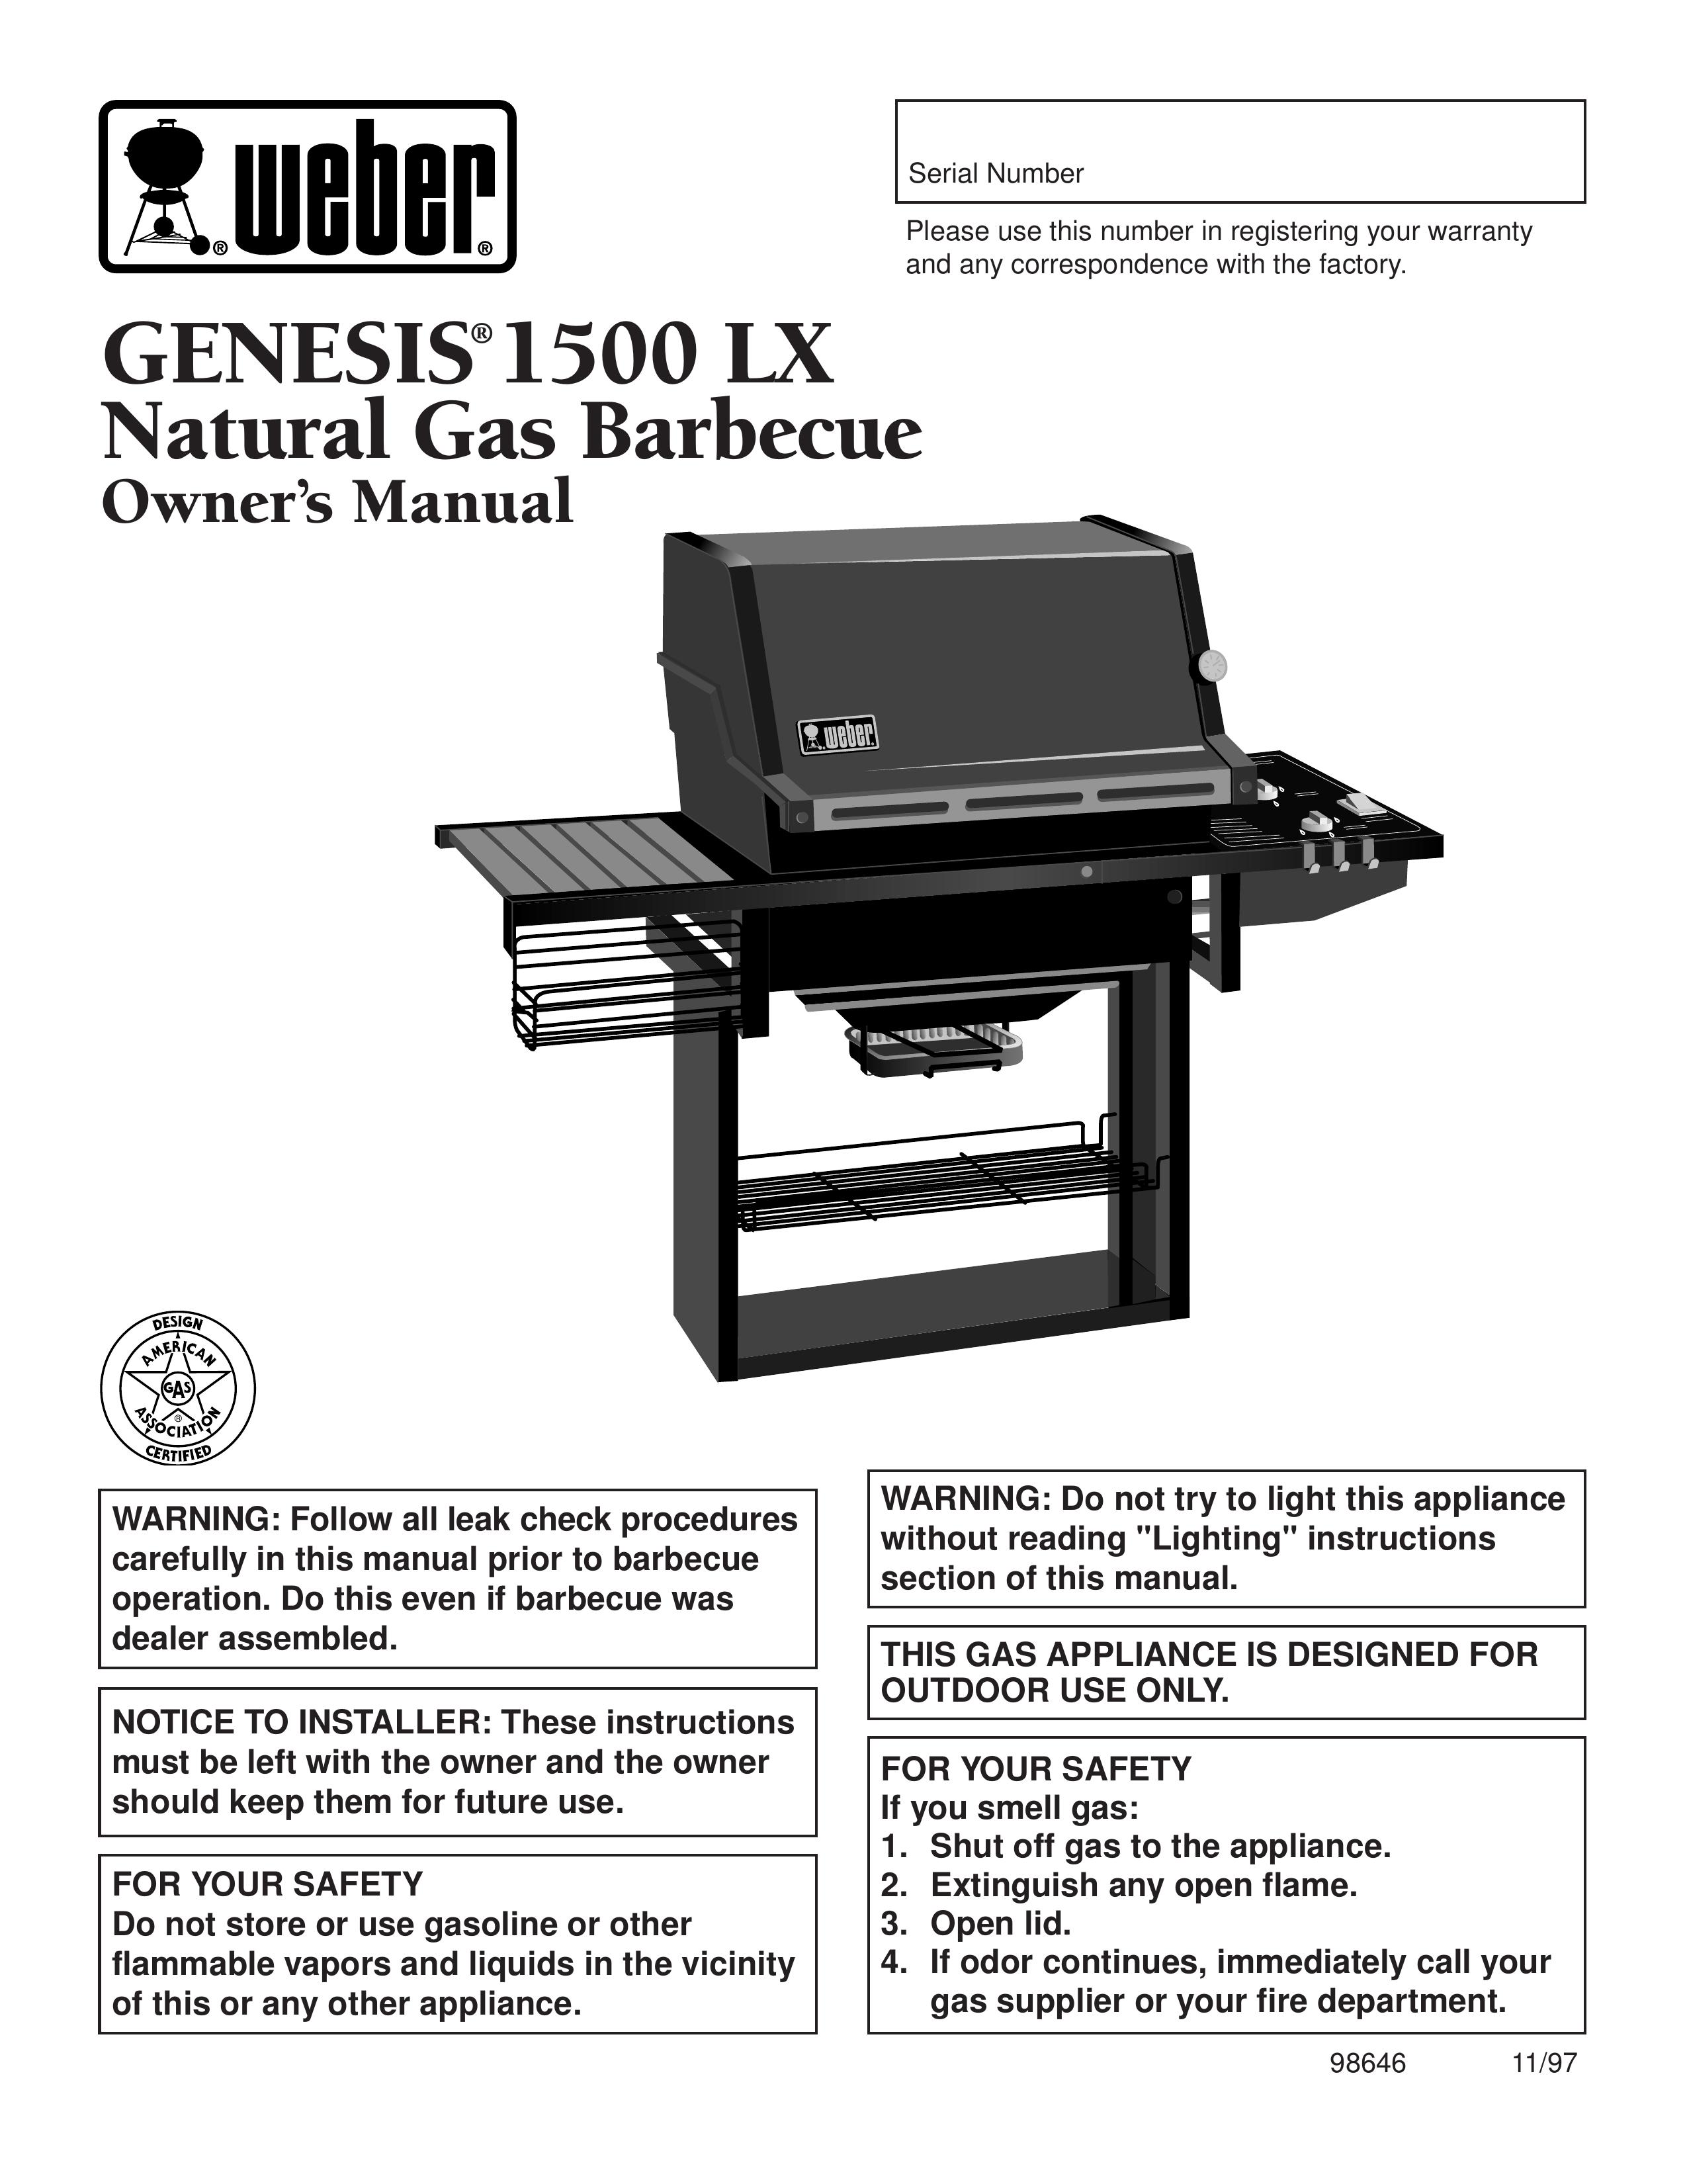 Weber 1500 LX Gas Grill User Manual